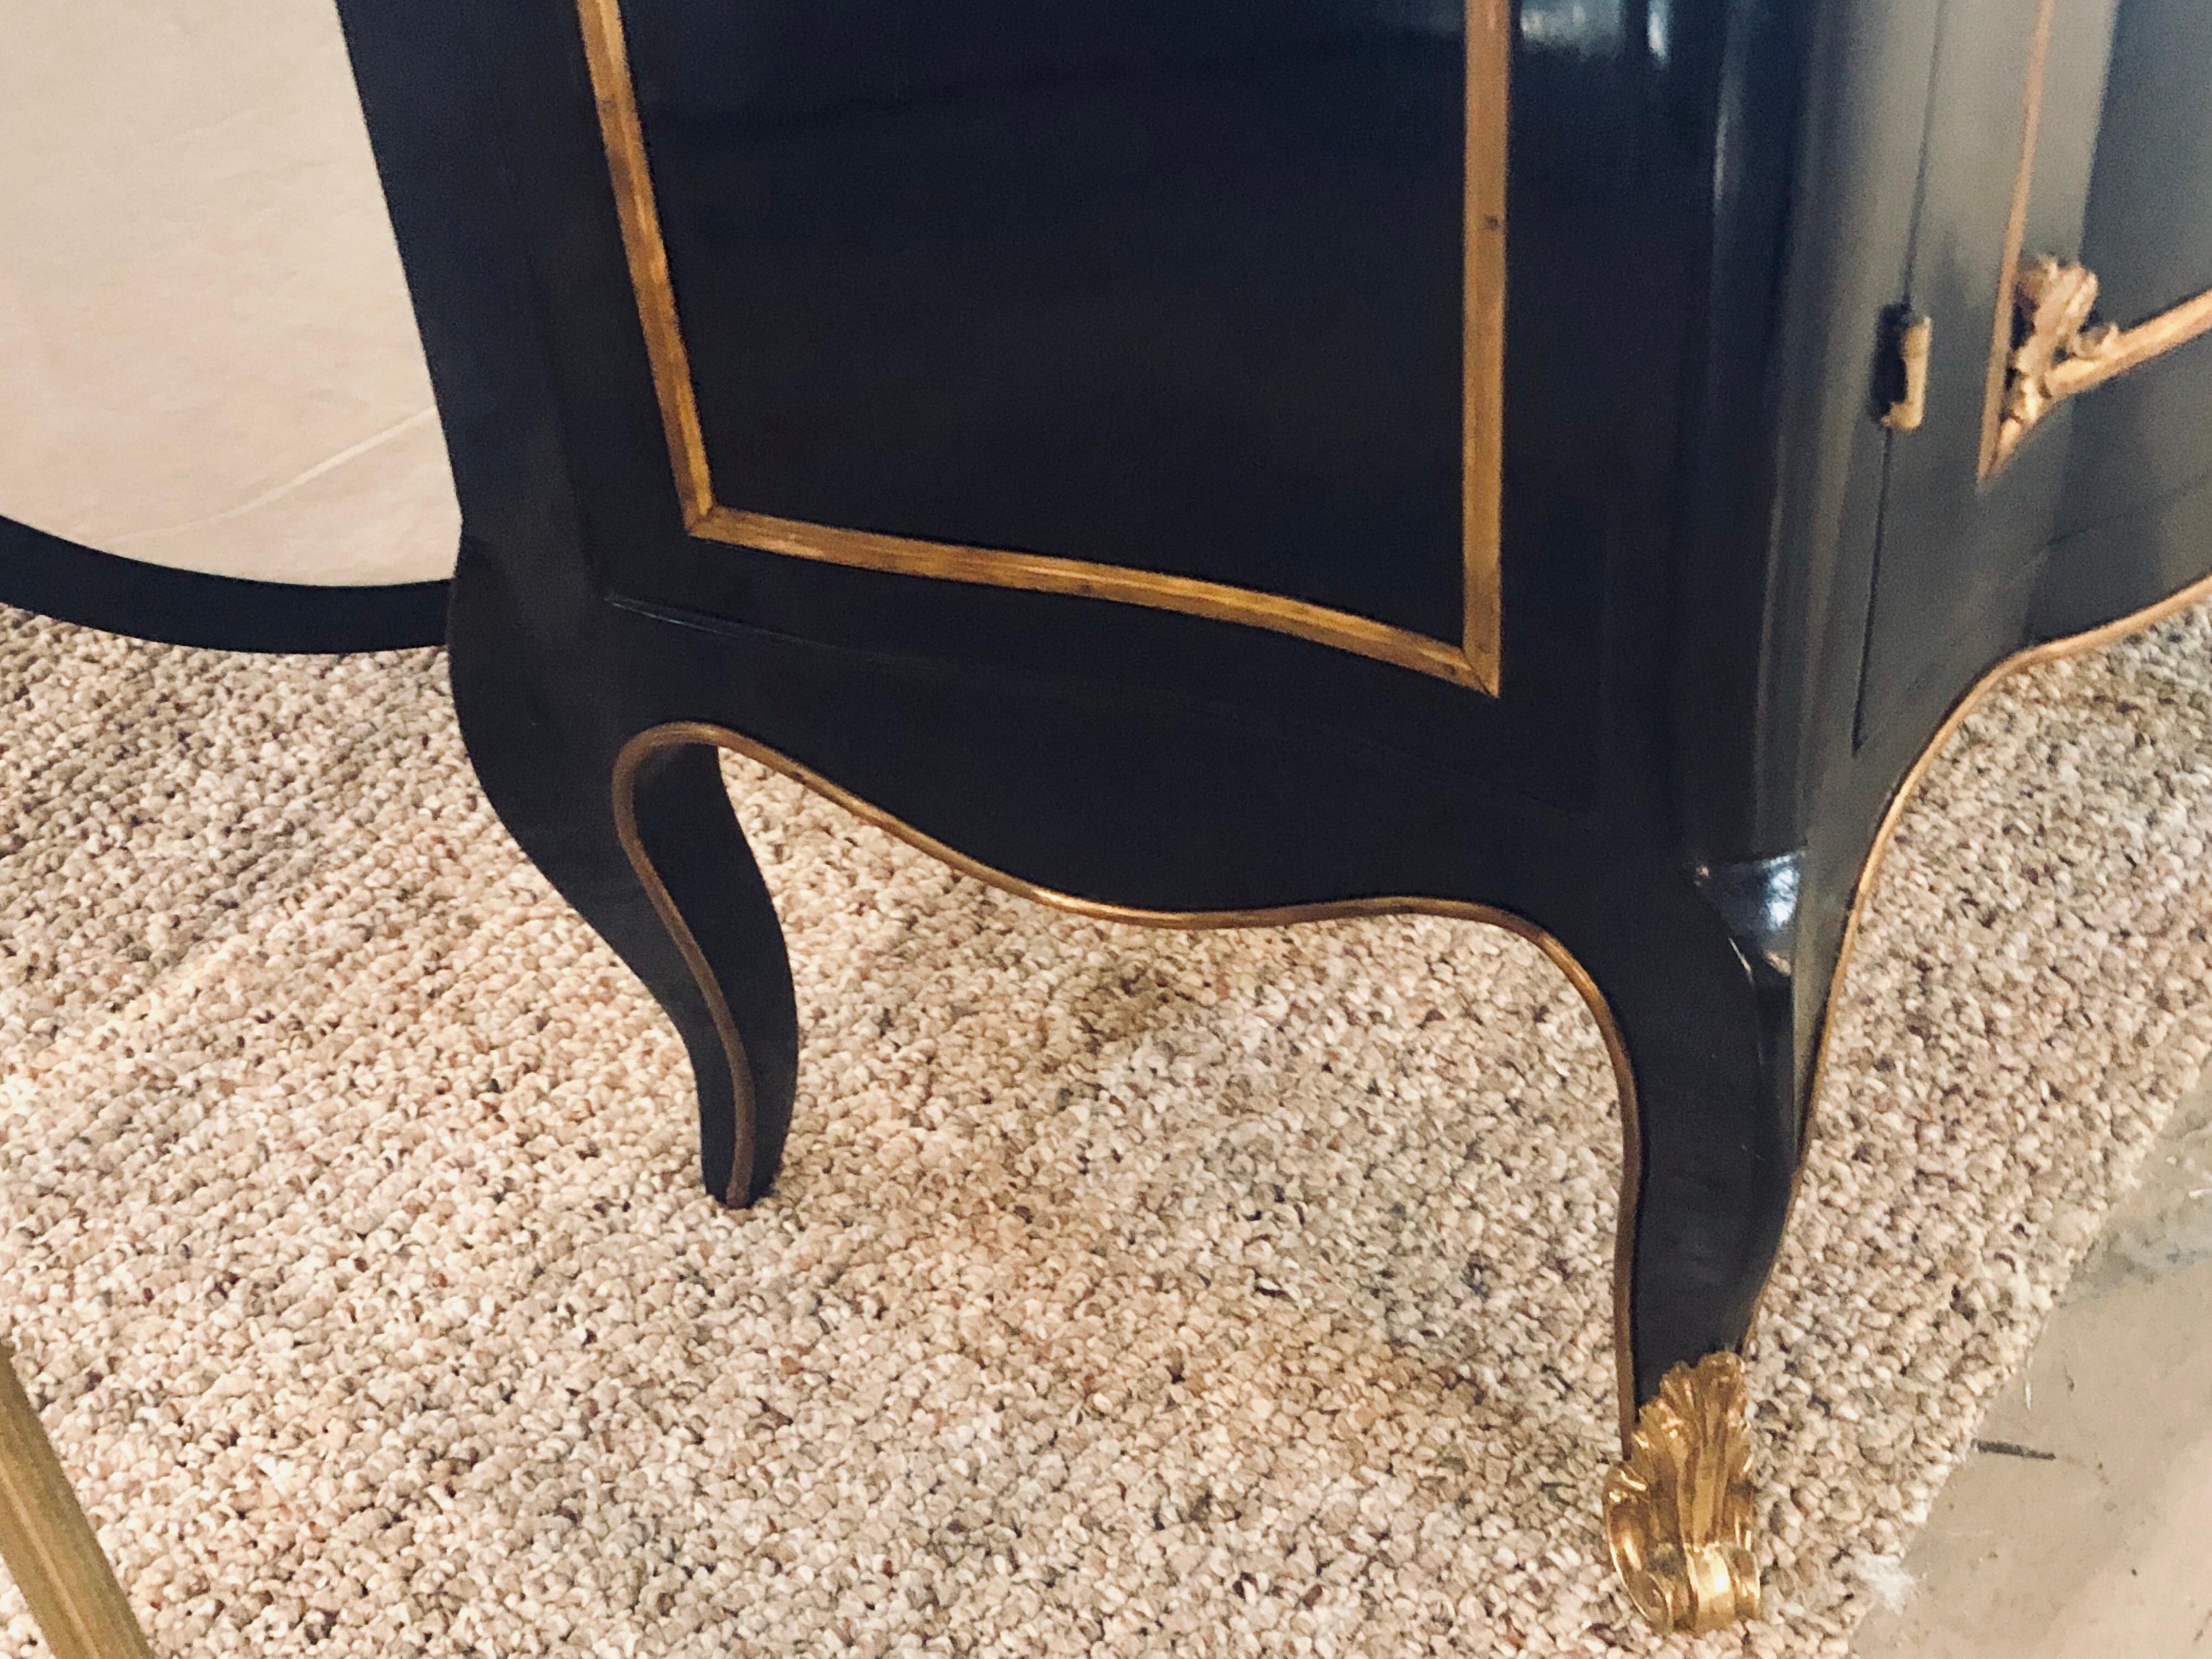 Maison Jansen Style, Hollywood Regency, Commodes, Black Lacquer, Marble, 1950s For Sale 12